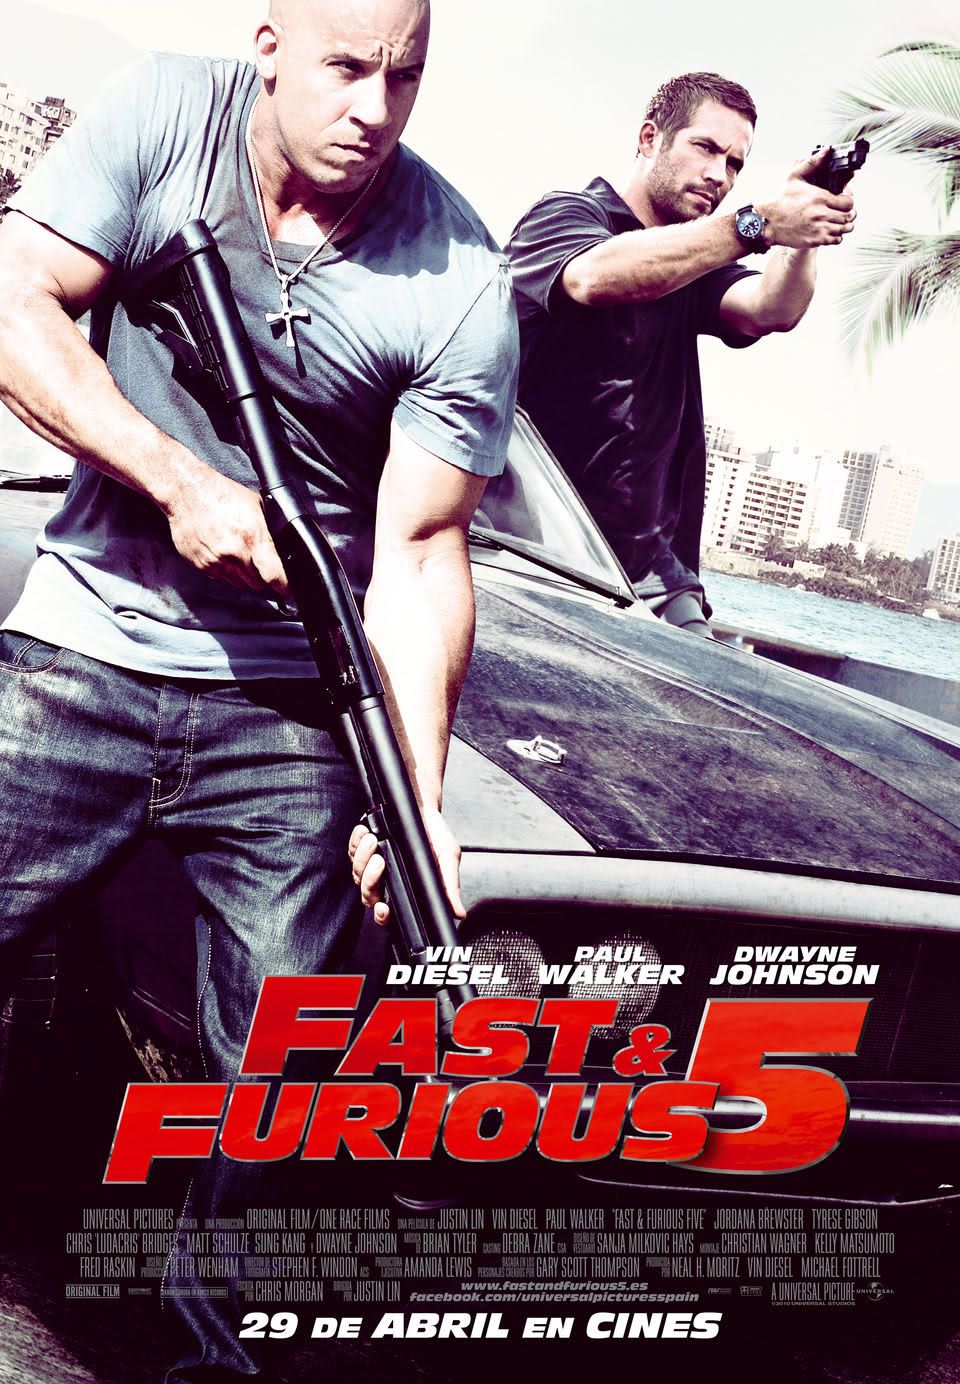 'Fast & Furious 5': The film that transformed the Toretto saga forever and that laid the foundations for its end in 'Fast X'